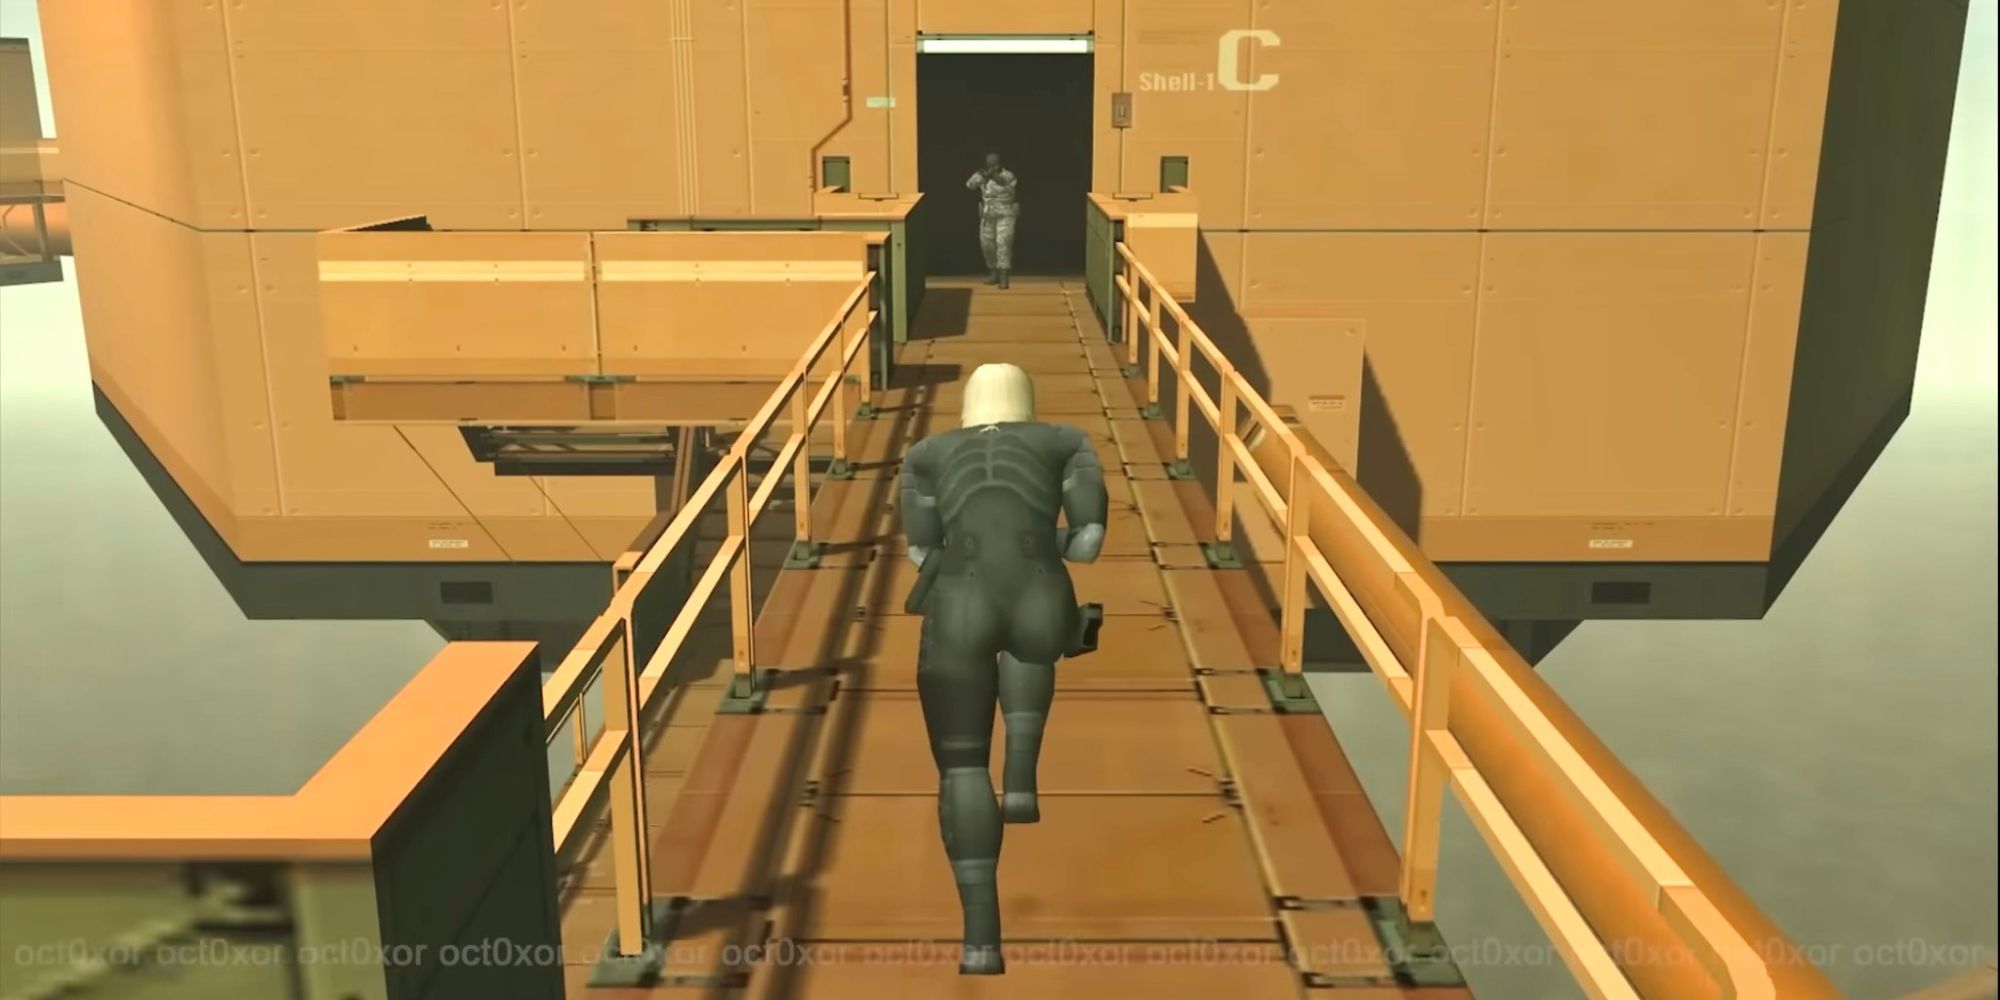 mgs2 with third person mod